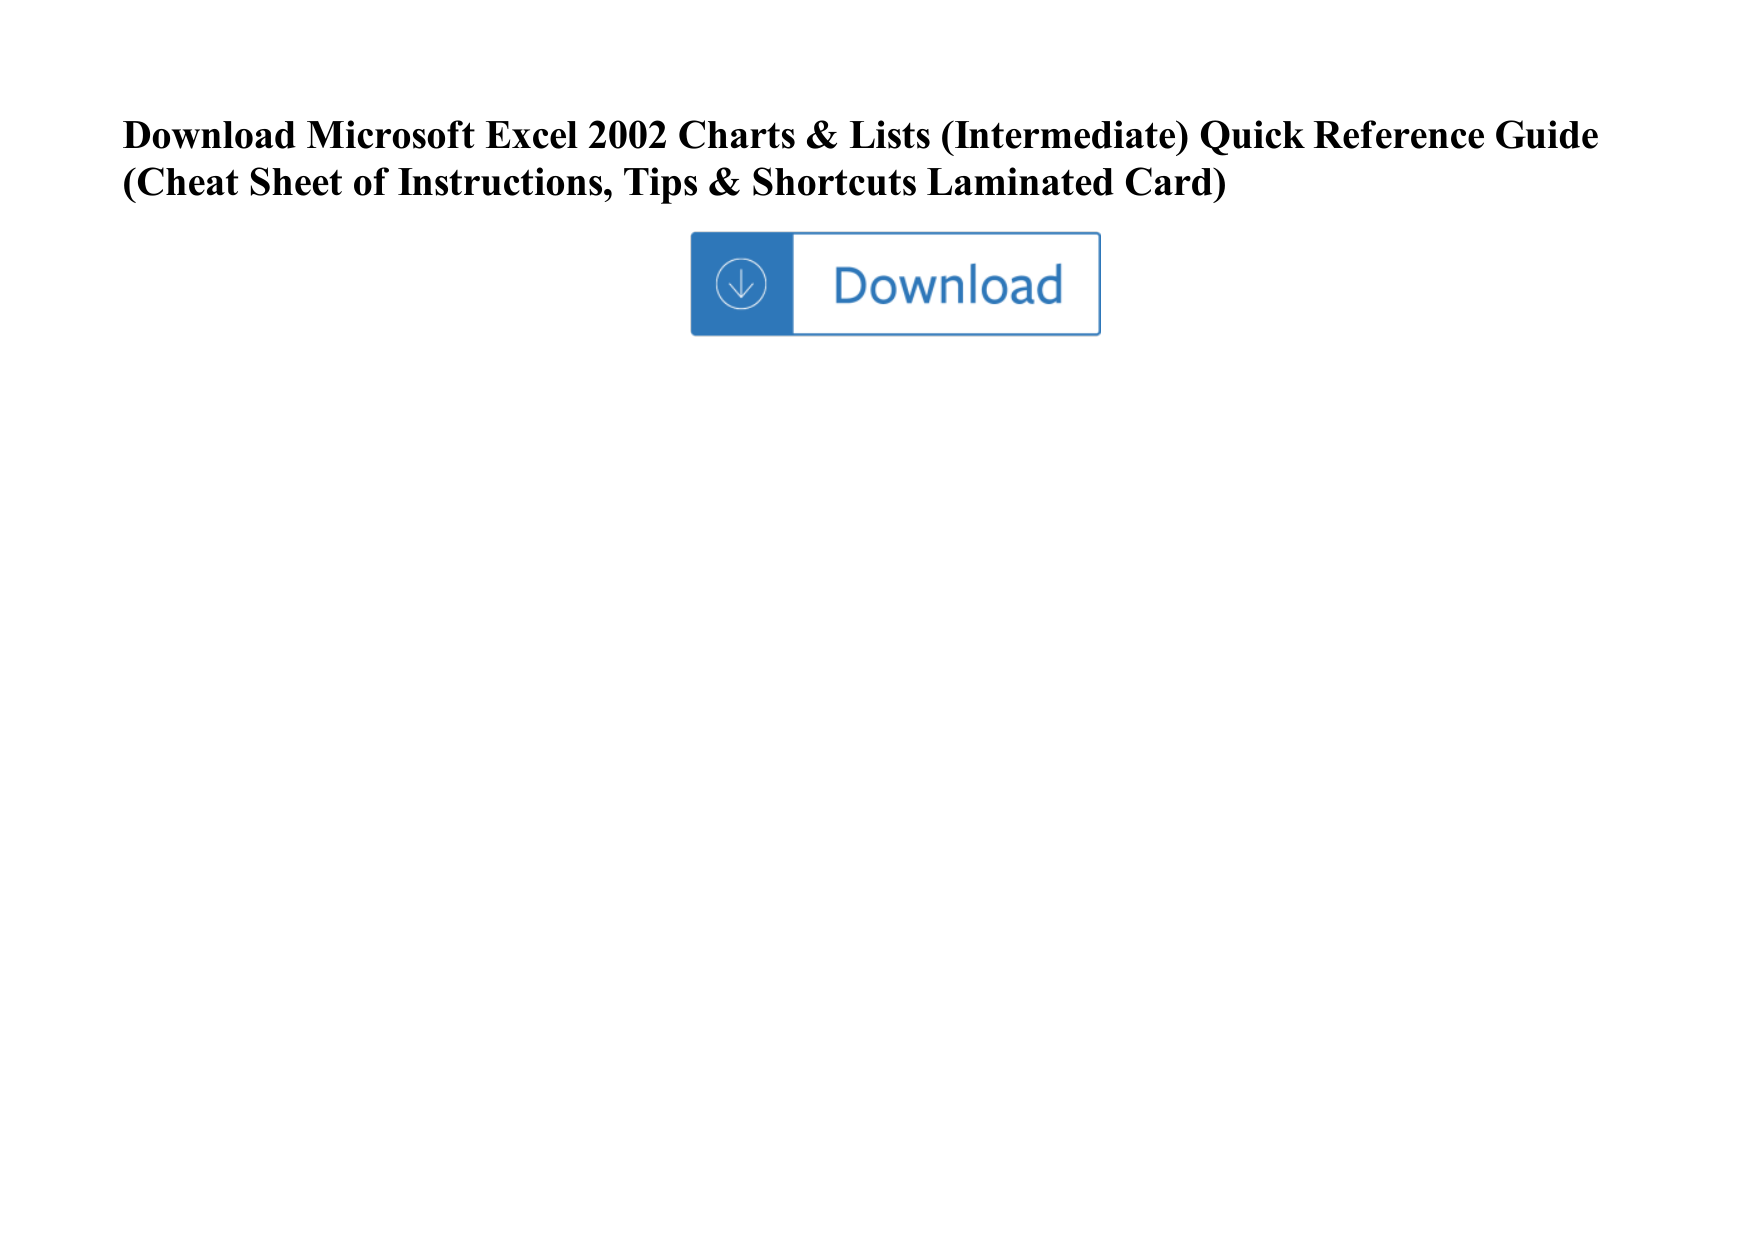 Page 1 of 1 - Microsoft Excel 2002 Charts & Lists (Intermediate) Quick Reference Guide (Cheat Sheet Of Instructions, Tips Shortcuts  Microsoft-excel-2002-charts-lists-intermediate-quick-reference-guide-cheat-sheet-of-instructions-tips-shortcuts-laminated-card